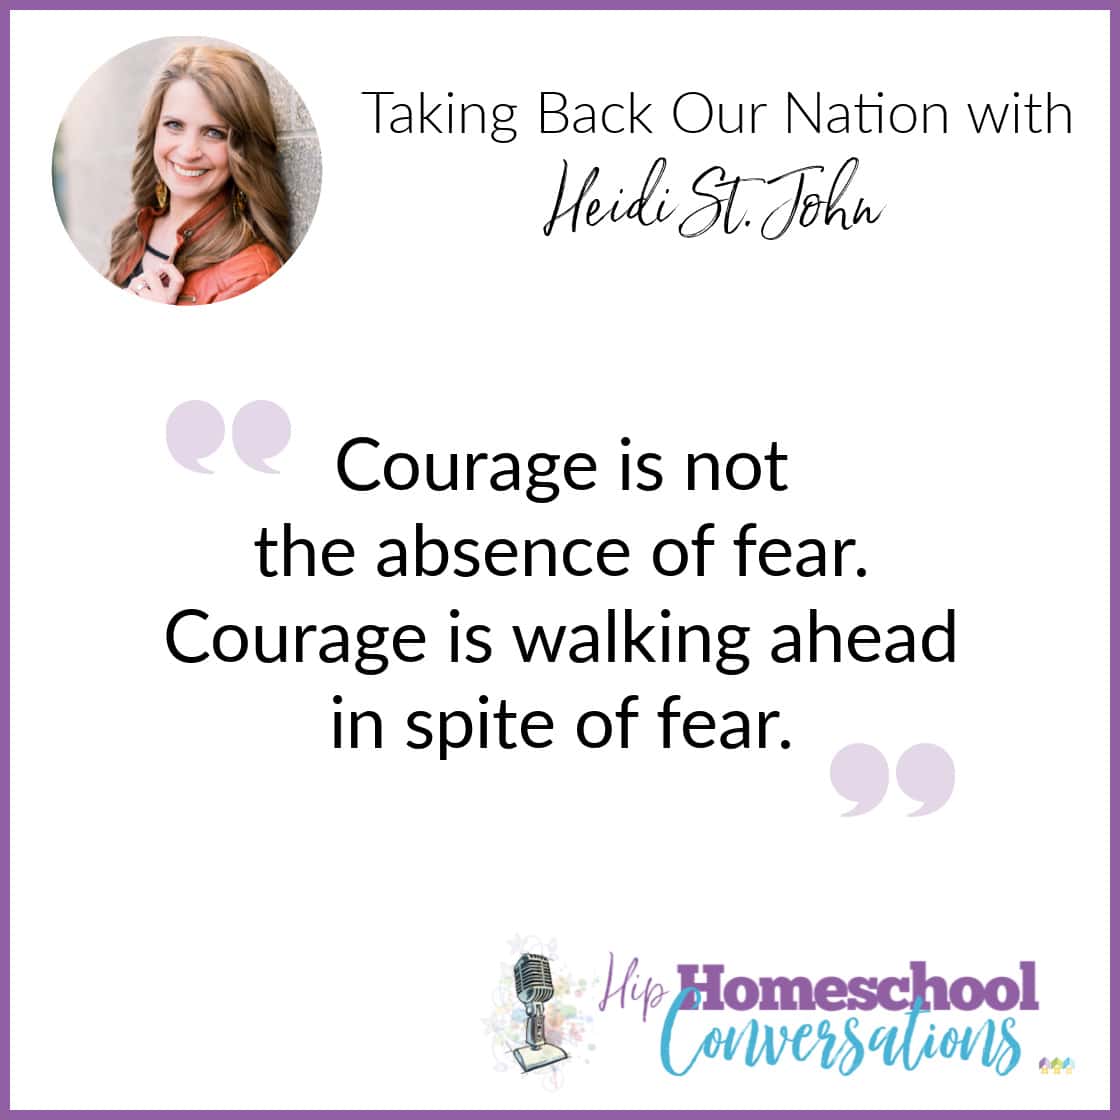 Our nation and our rights as homeschoolers are worth fighting for! Join us as we talk to Christian wife, homeschooling mom of seven, self-described Constitutionalist, author, and public speaker Heidi St. John.